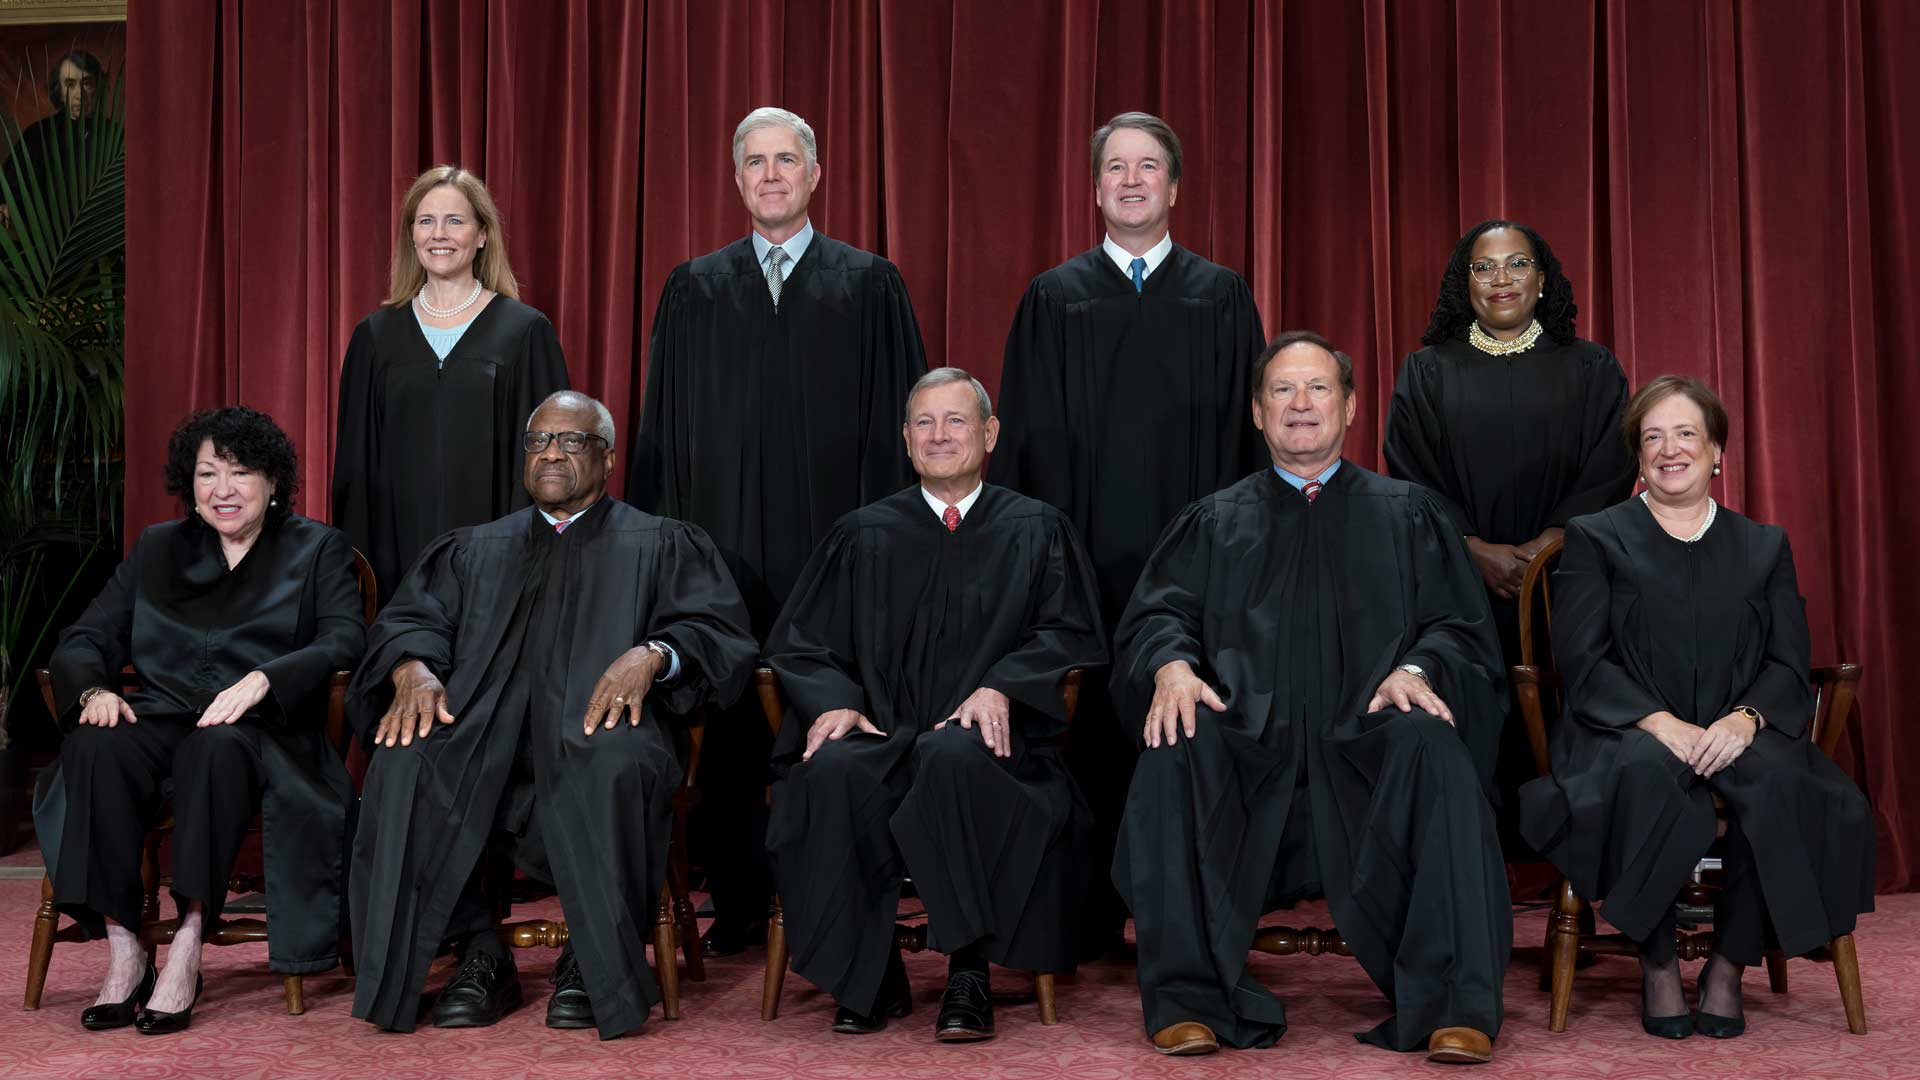 Members of the Supreme Court sit for a new group portrait following the addition of Associate Justice Ketanji Brown Jackson, at the Supreme Court building in Washington, Friday, Oct. 7, 2022. Bottom row, from left, Justice Sonia Sotomayor, Justice Clarence Thomas, Chief Justice of the United States John Roberts, Justice Samuel Alito, and Justice Elena Kagan. Top row, from left, Justice Amy Coney Barrett, Justice Neil Gorsuch, Justice Brett Kavanaugh, and Justice Ketanji Brown Jackson.